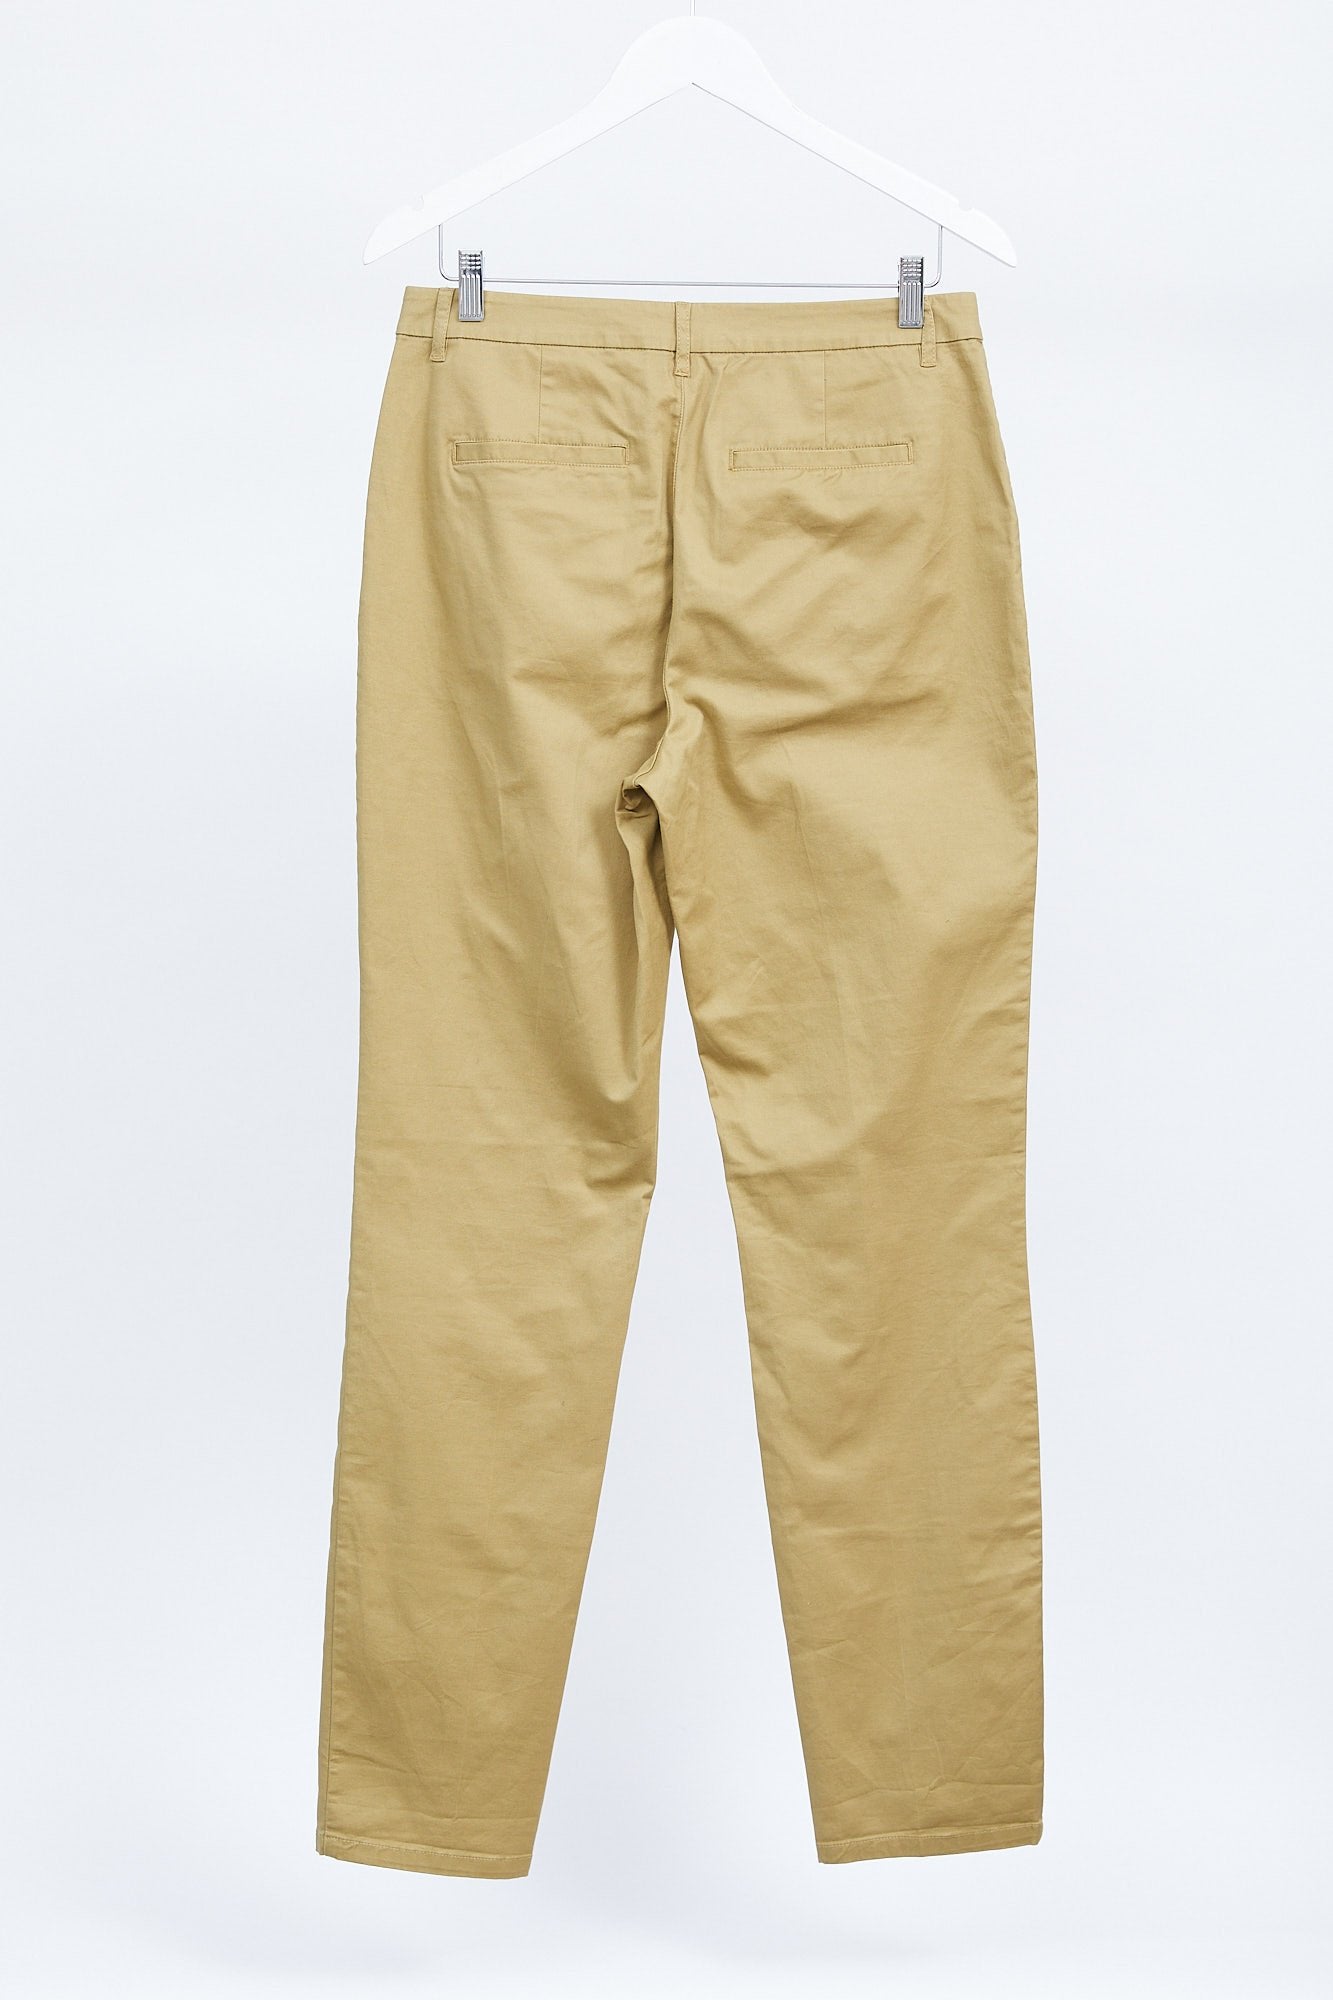 Womens Beige Trouser: Size Small